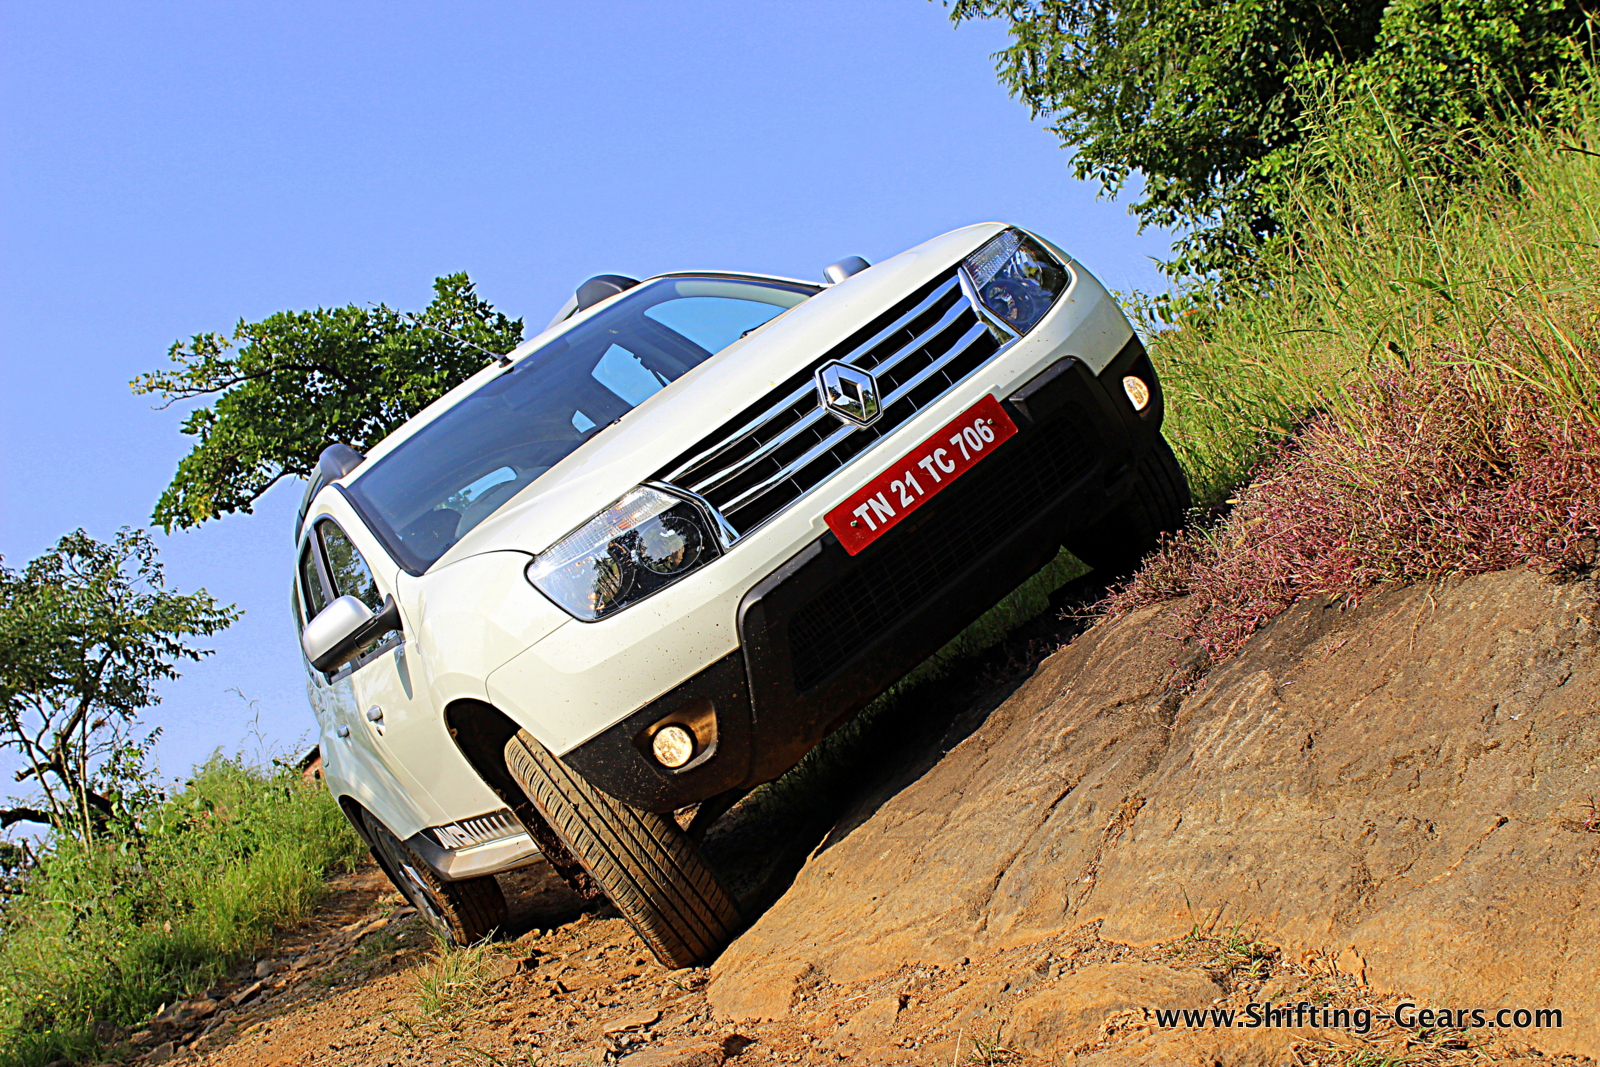 Renault Duster AWD photo gallery